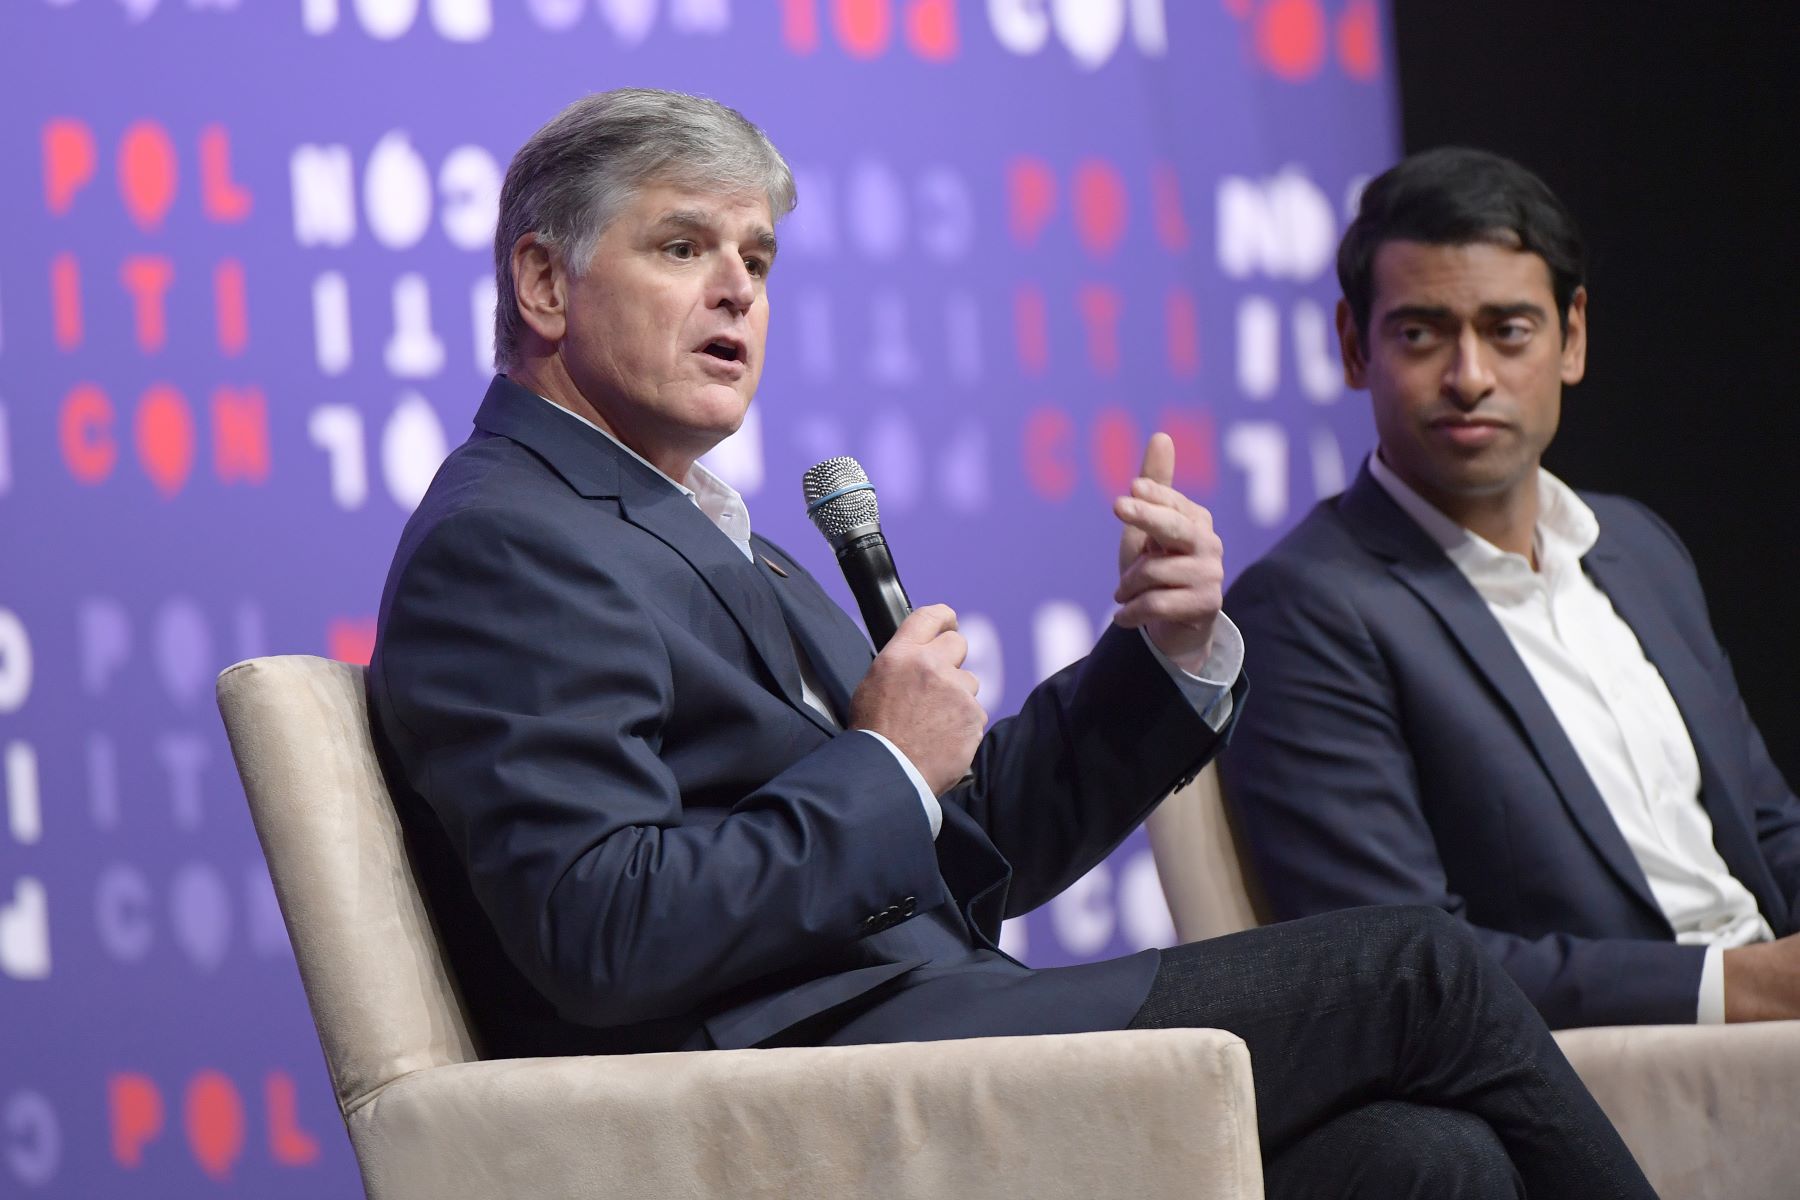 Sean Hannity with Steven Olikara on stage at the 2019 Politicon at the Music City Center in Nashville, Tennessee